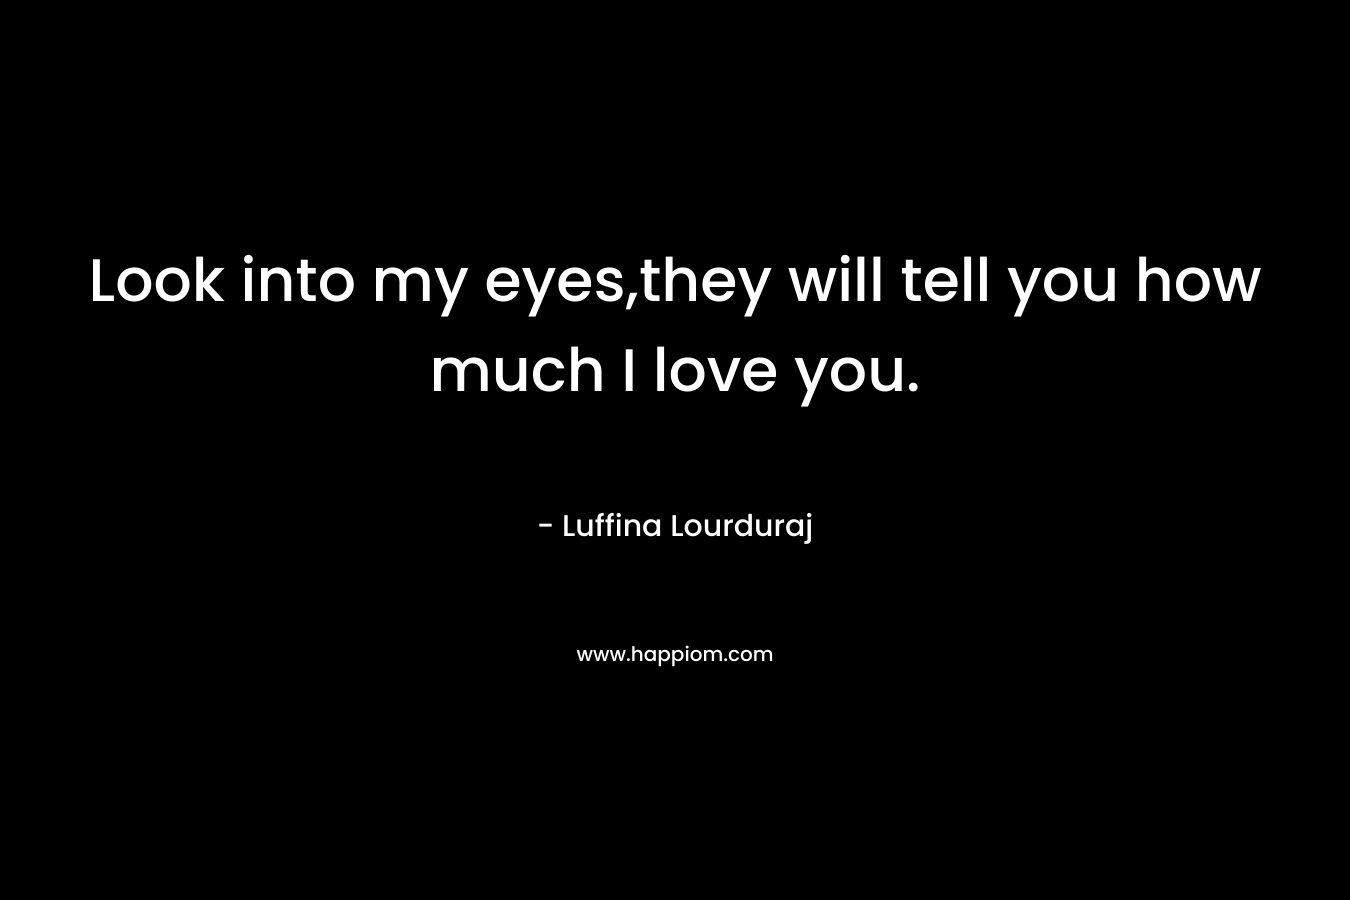 Look into my eyes,they will tell you how much I love you. – Luffina Lourduraj